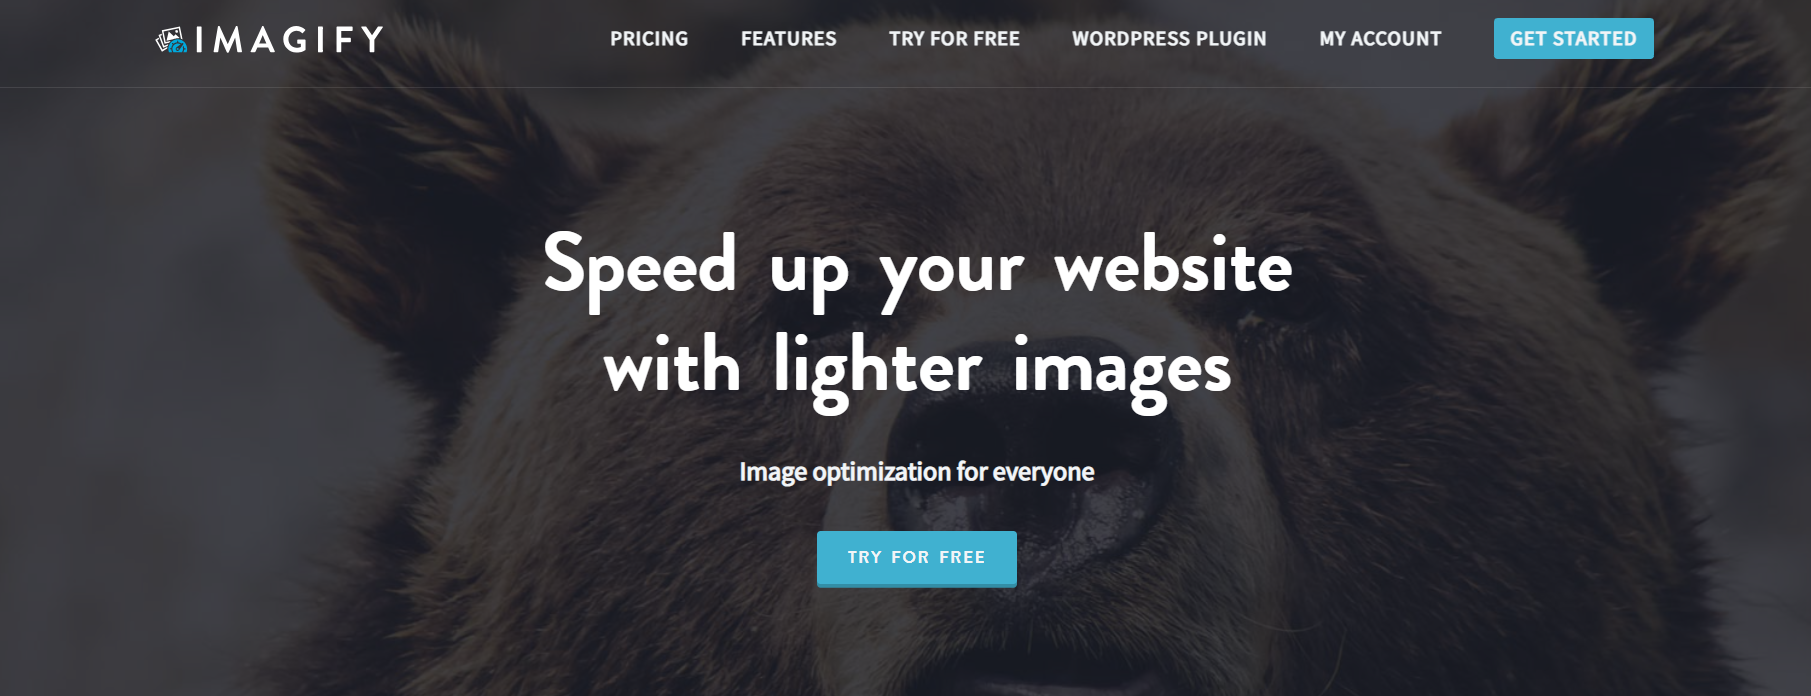 Optimize Images for Faster Loading - Imagify